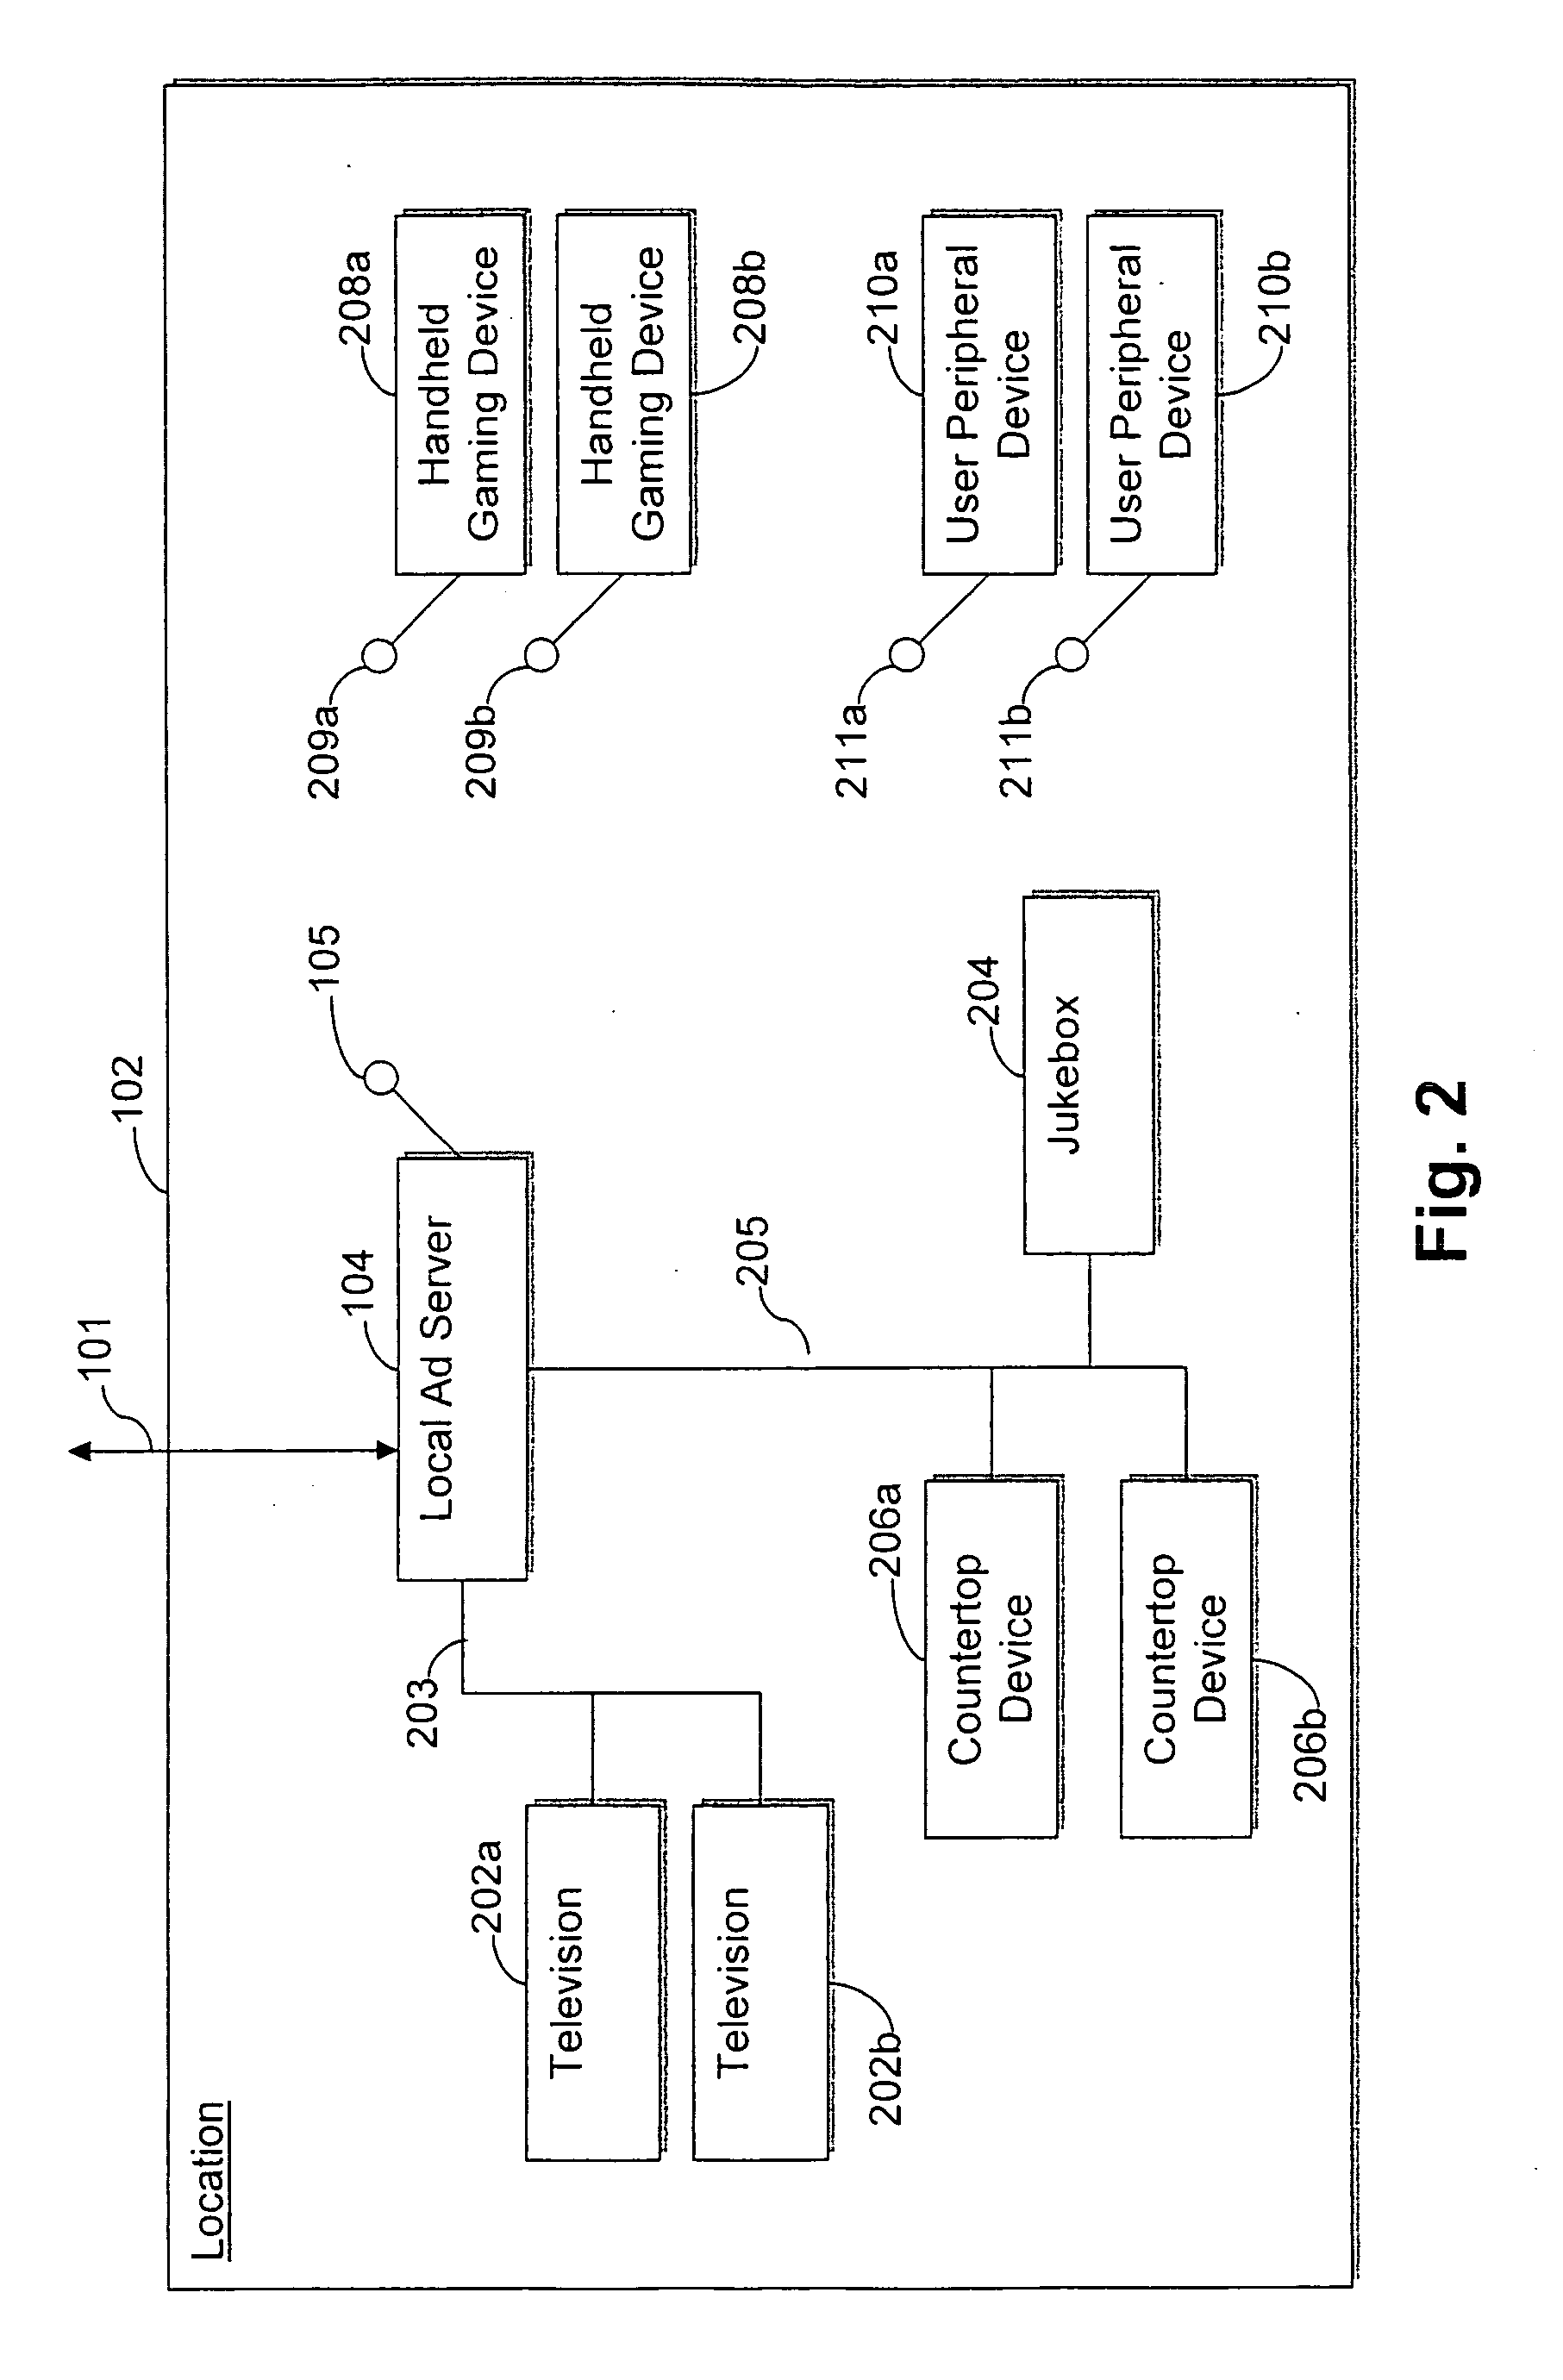 System and/or methods for distributing advertisements from a central advertisement network to a peripheral device via a local advertisement server